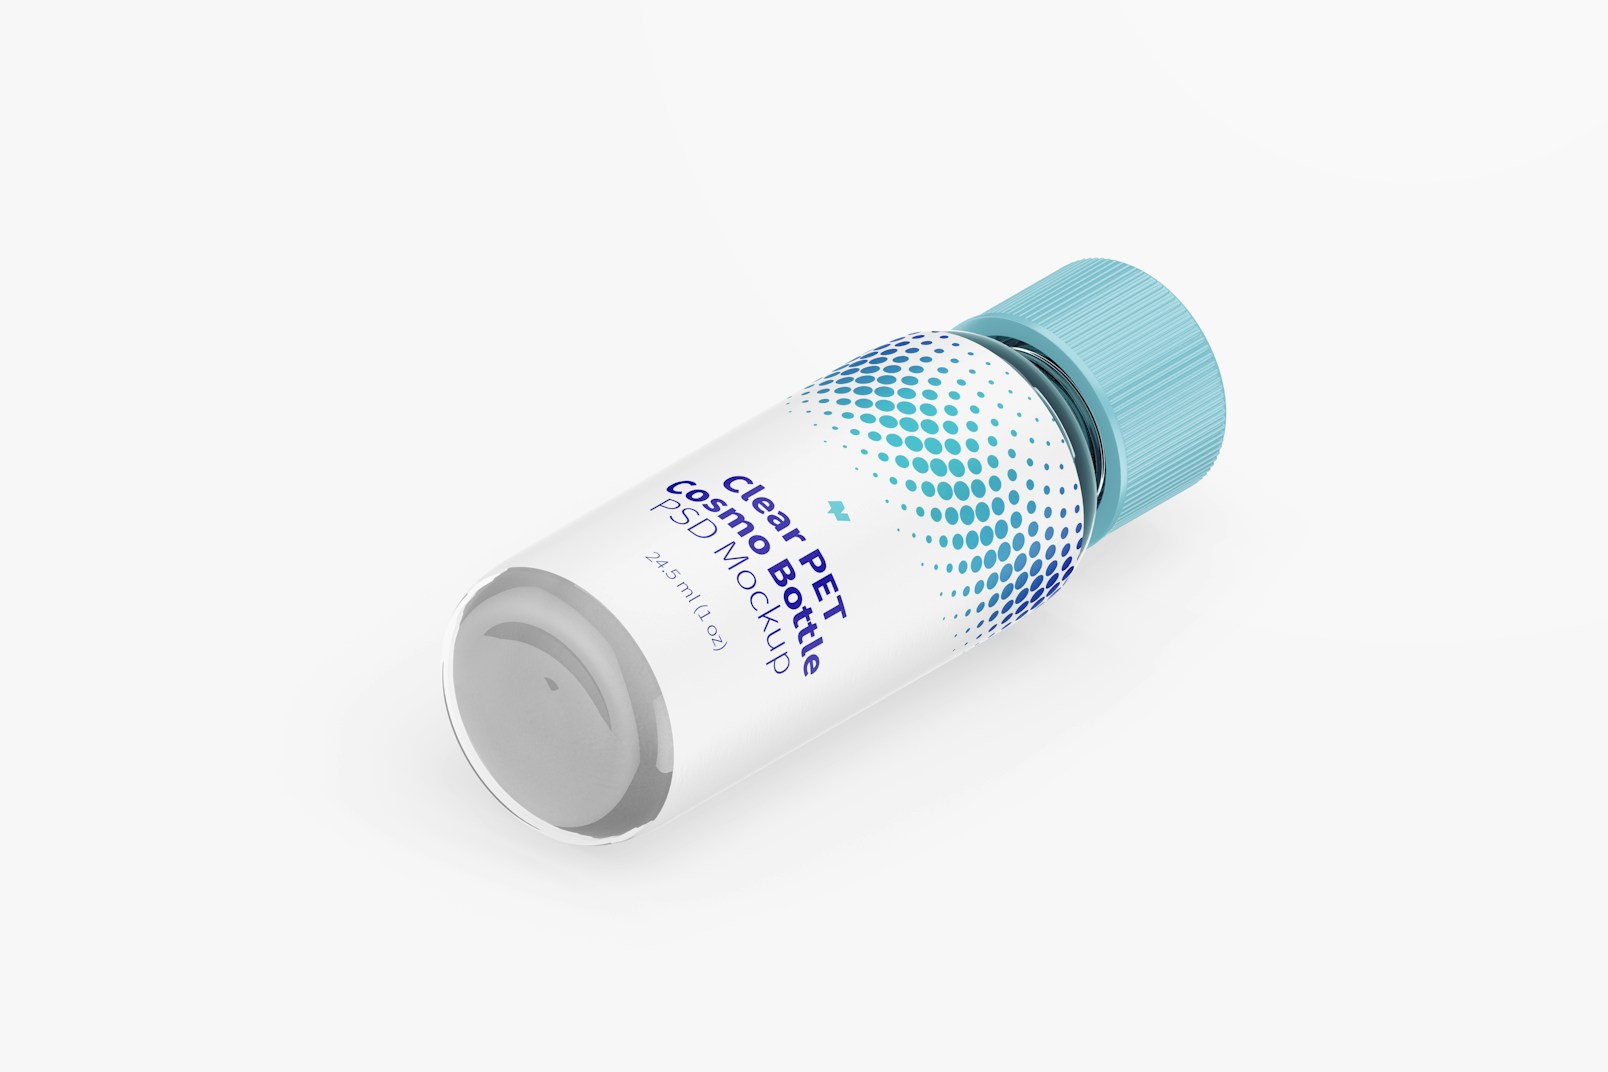 1 oz PET Cosmo Round Bottle Mockup, Isometric View Dropped